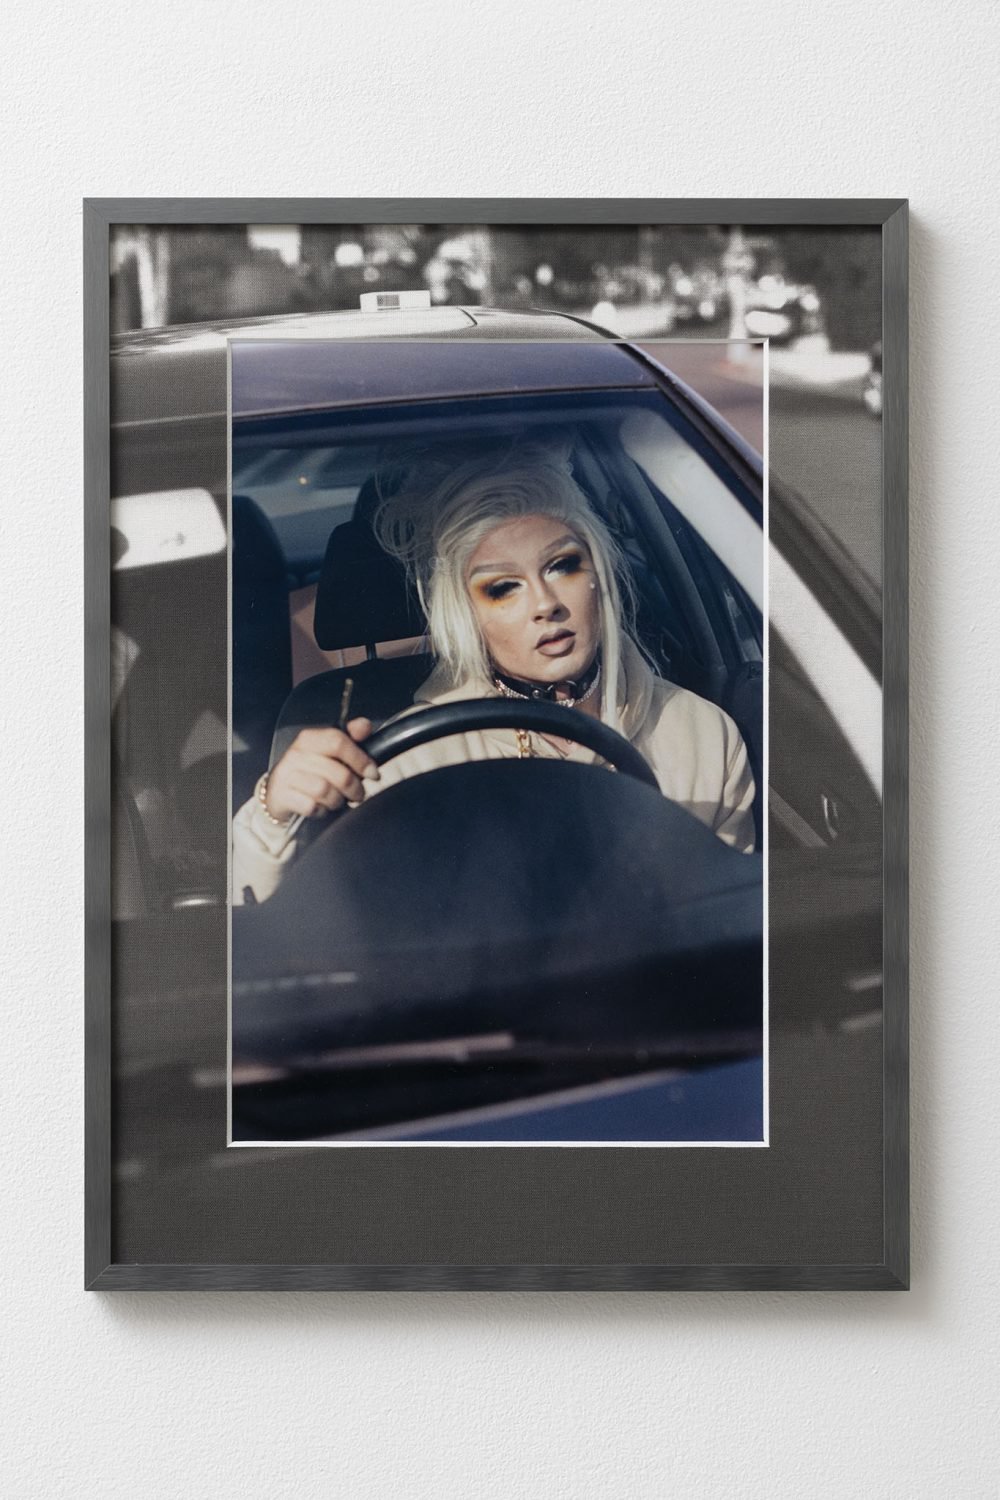 Philipp TimischlToo blessed to be stressed, too broke to be bothered. (SILVERLAKE), 2019C-print, framed with custom passepartout40 x 30 cm